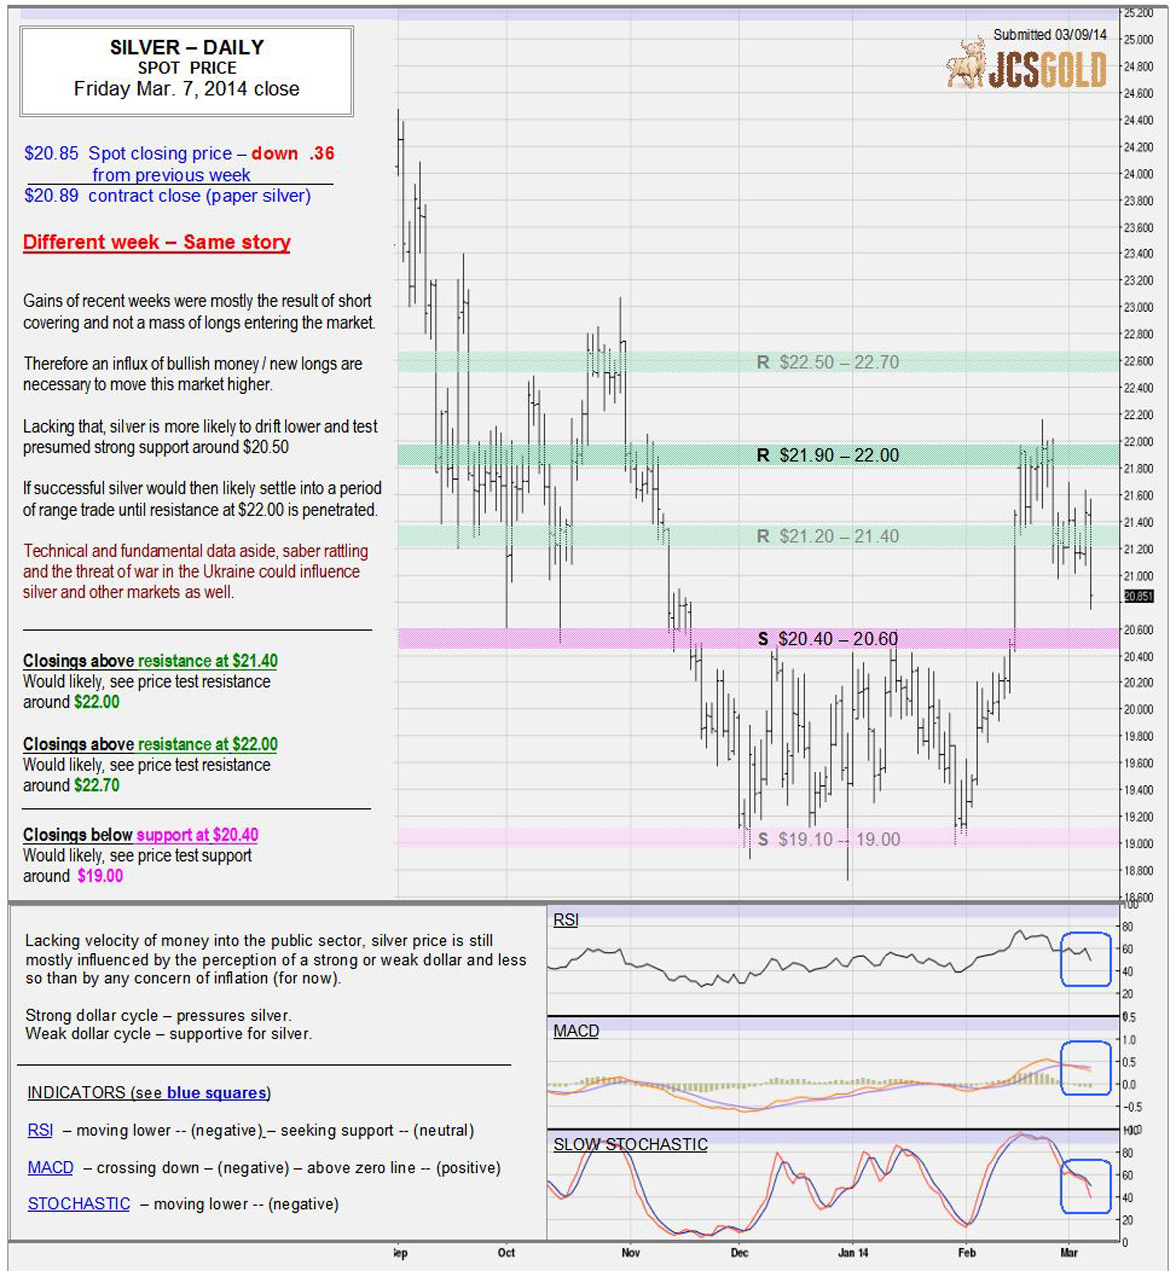 Mar 7, 2014 chart & commentary